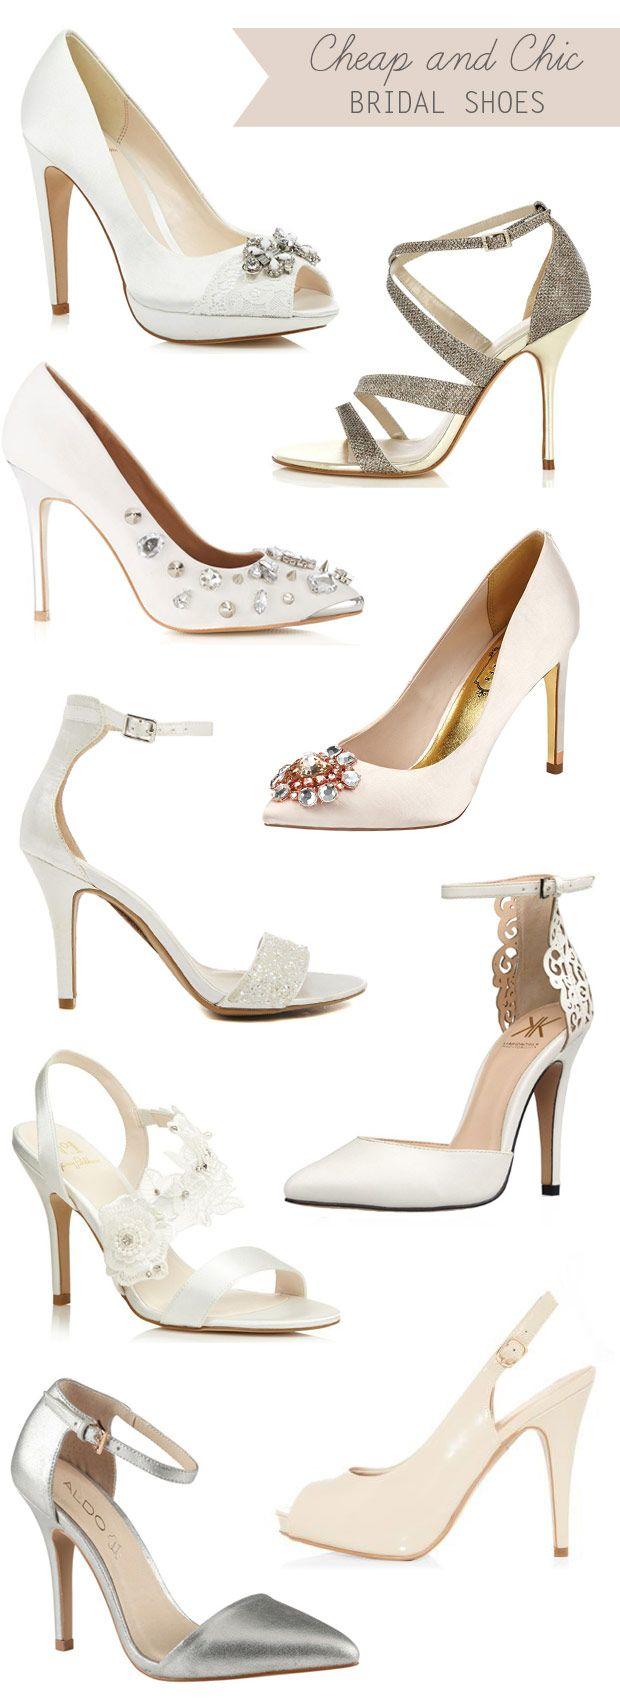 Cheap And Chic - Bridal Shoes On A Budget #2035326 - Weddbook